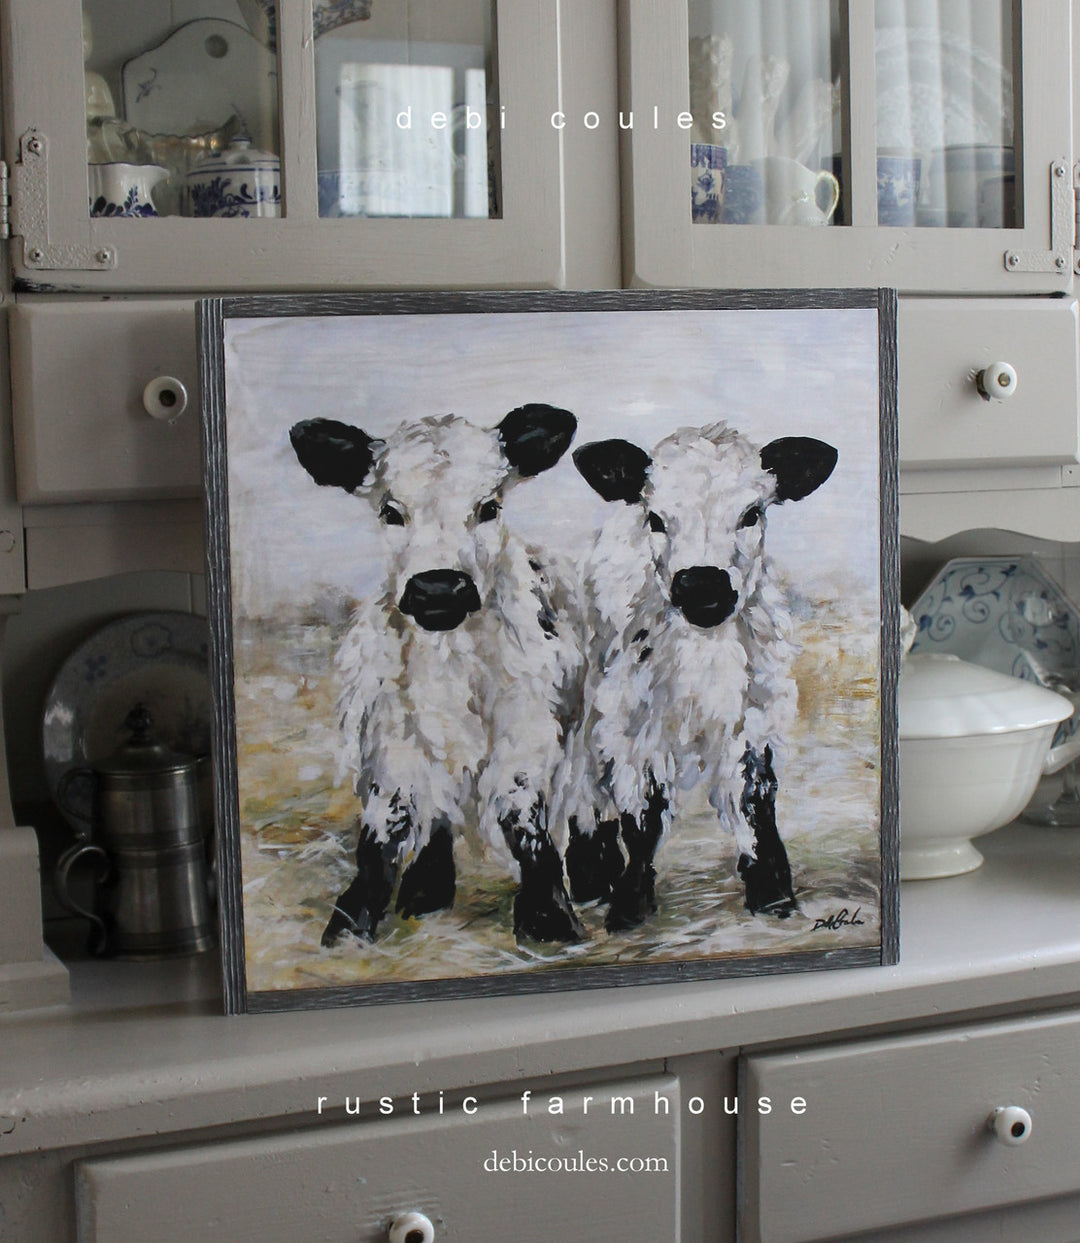 Freckles and Speckles baby cows, calfs, standing in a patch of hay in a pasture, Wood Print wall art, Bluish grey, Rustic Barn wood style frame, Debi Coules Artist, farmhouse collection, French Chic, Shabby Chic, Cottage Chic, Paris Chic, home décor